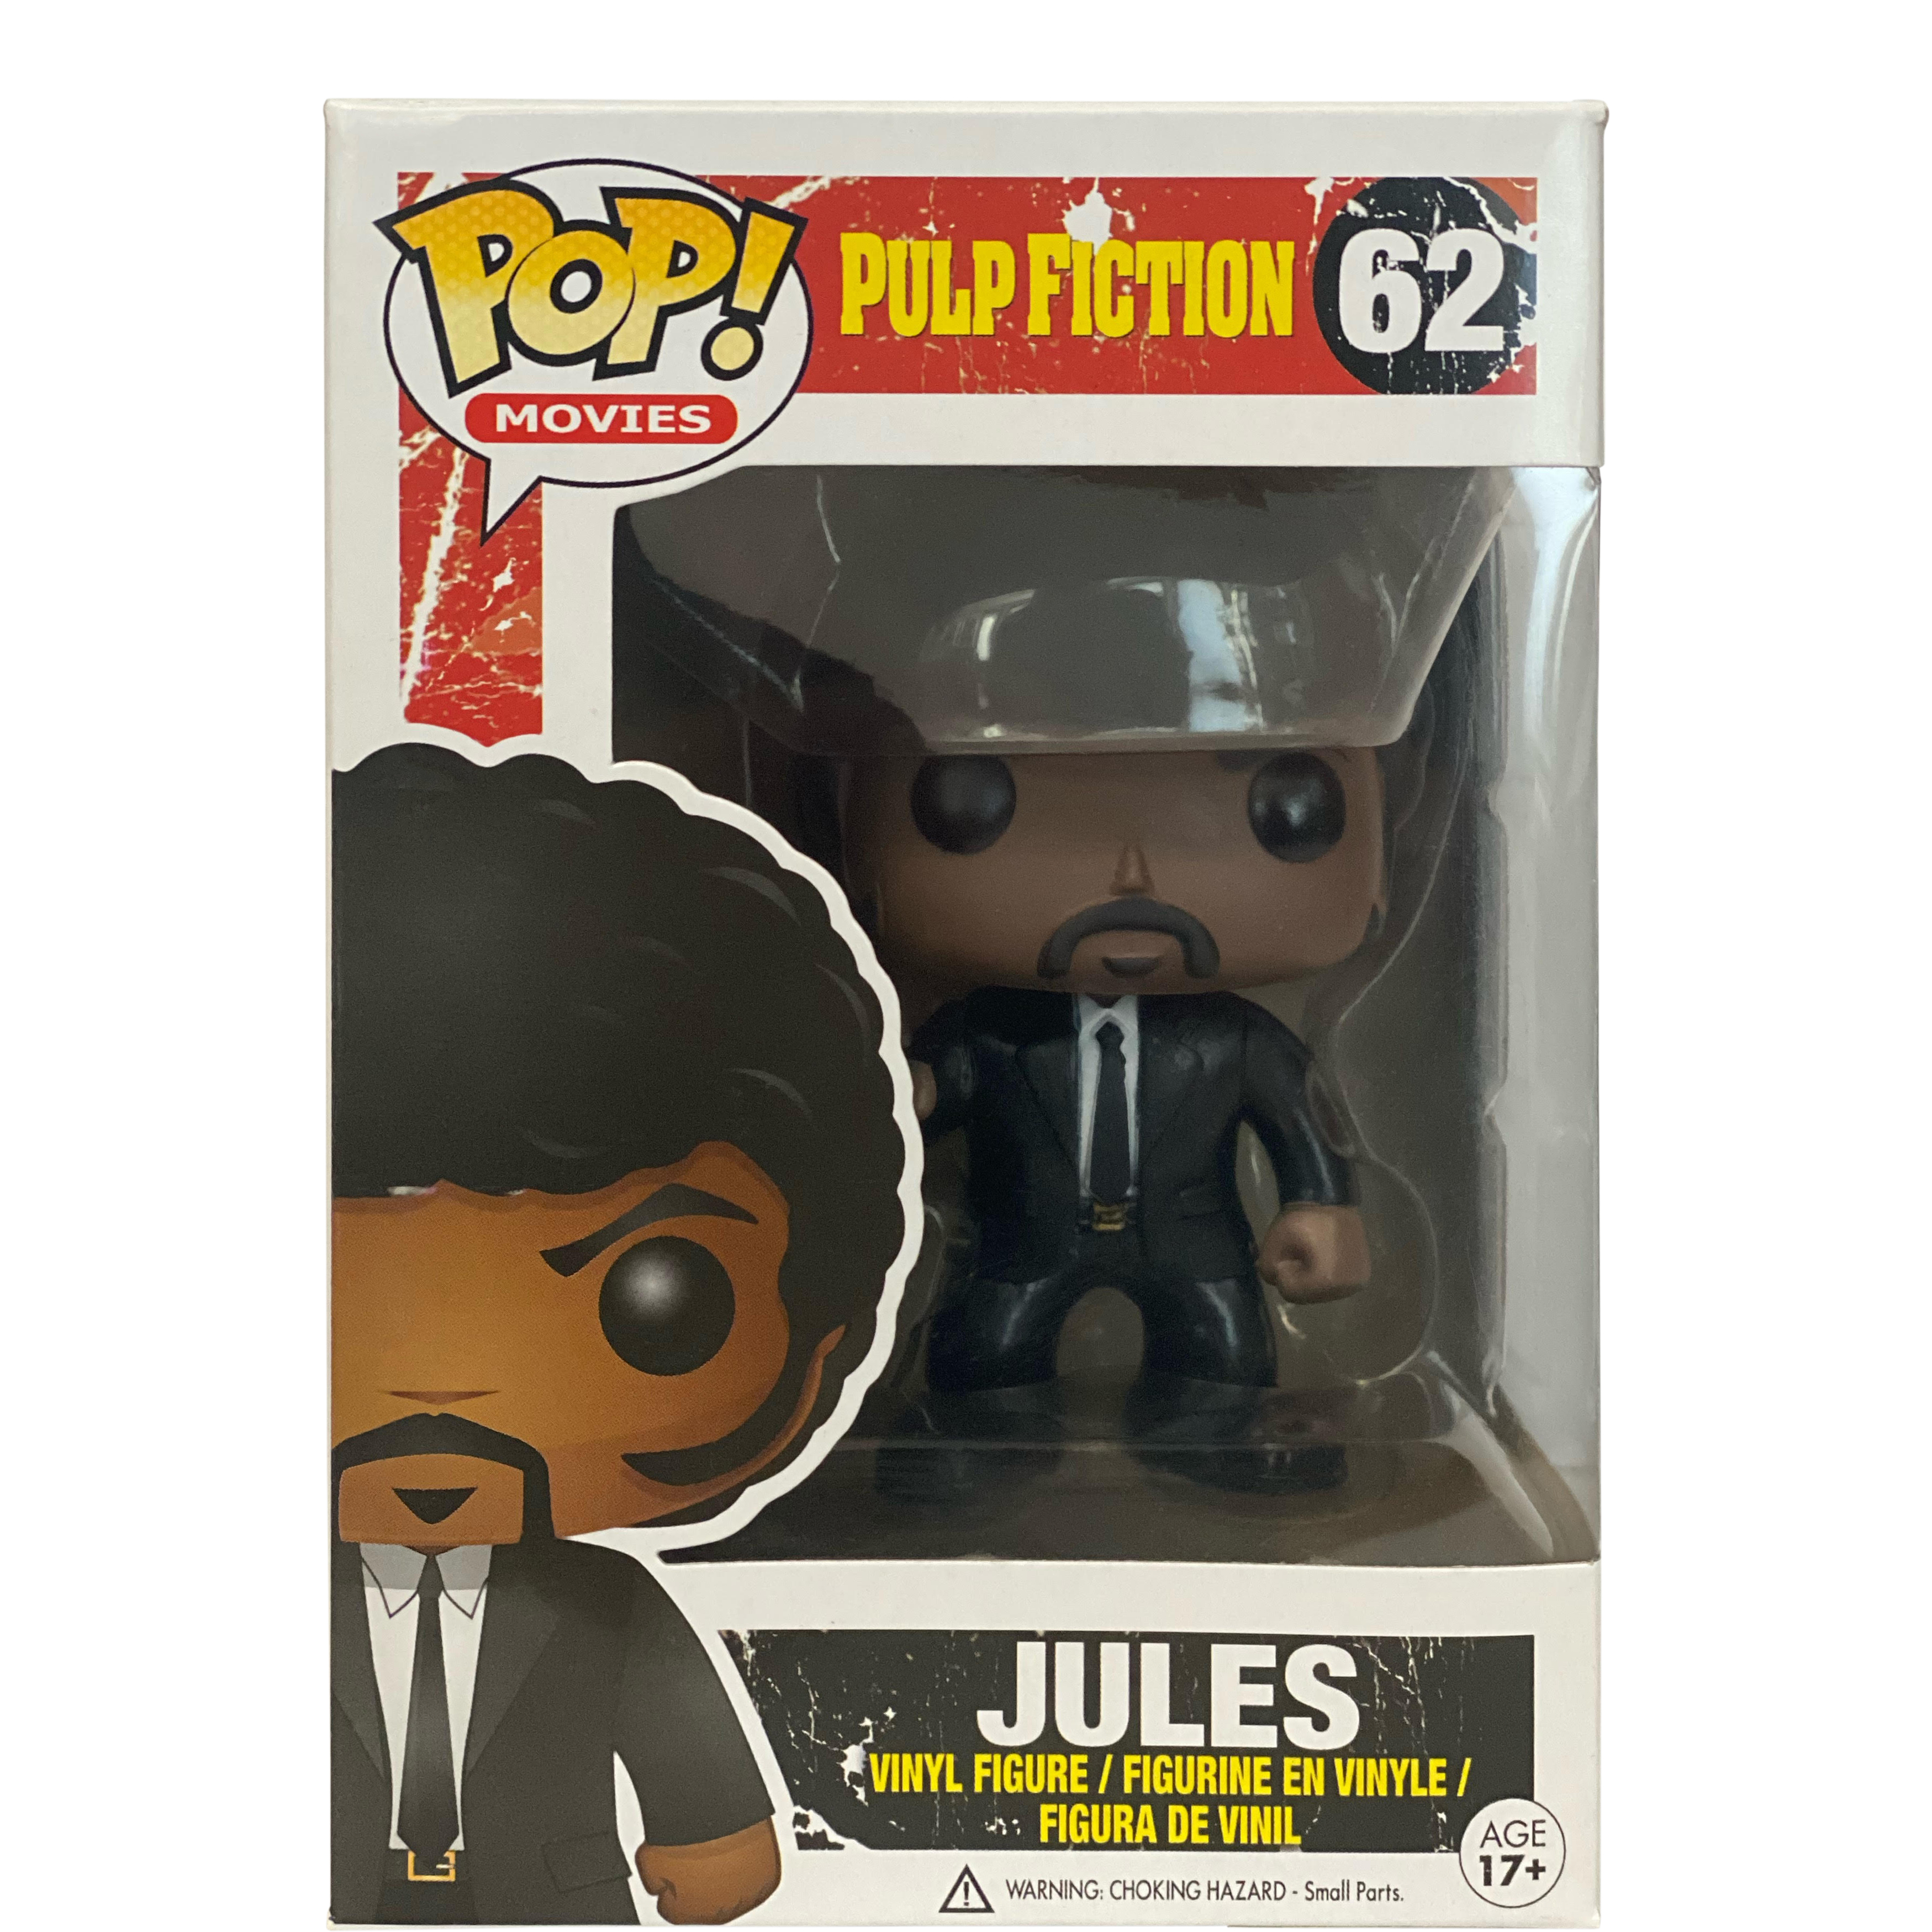 Funko Pop! Movies - Buy & Sell Collectibles.